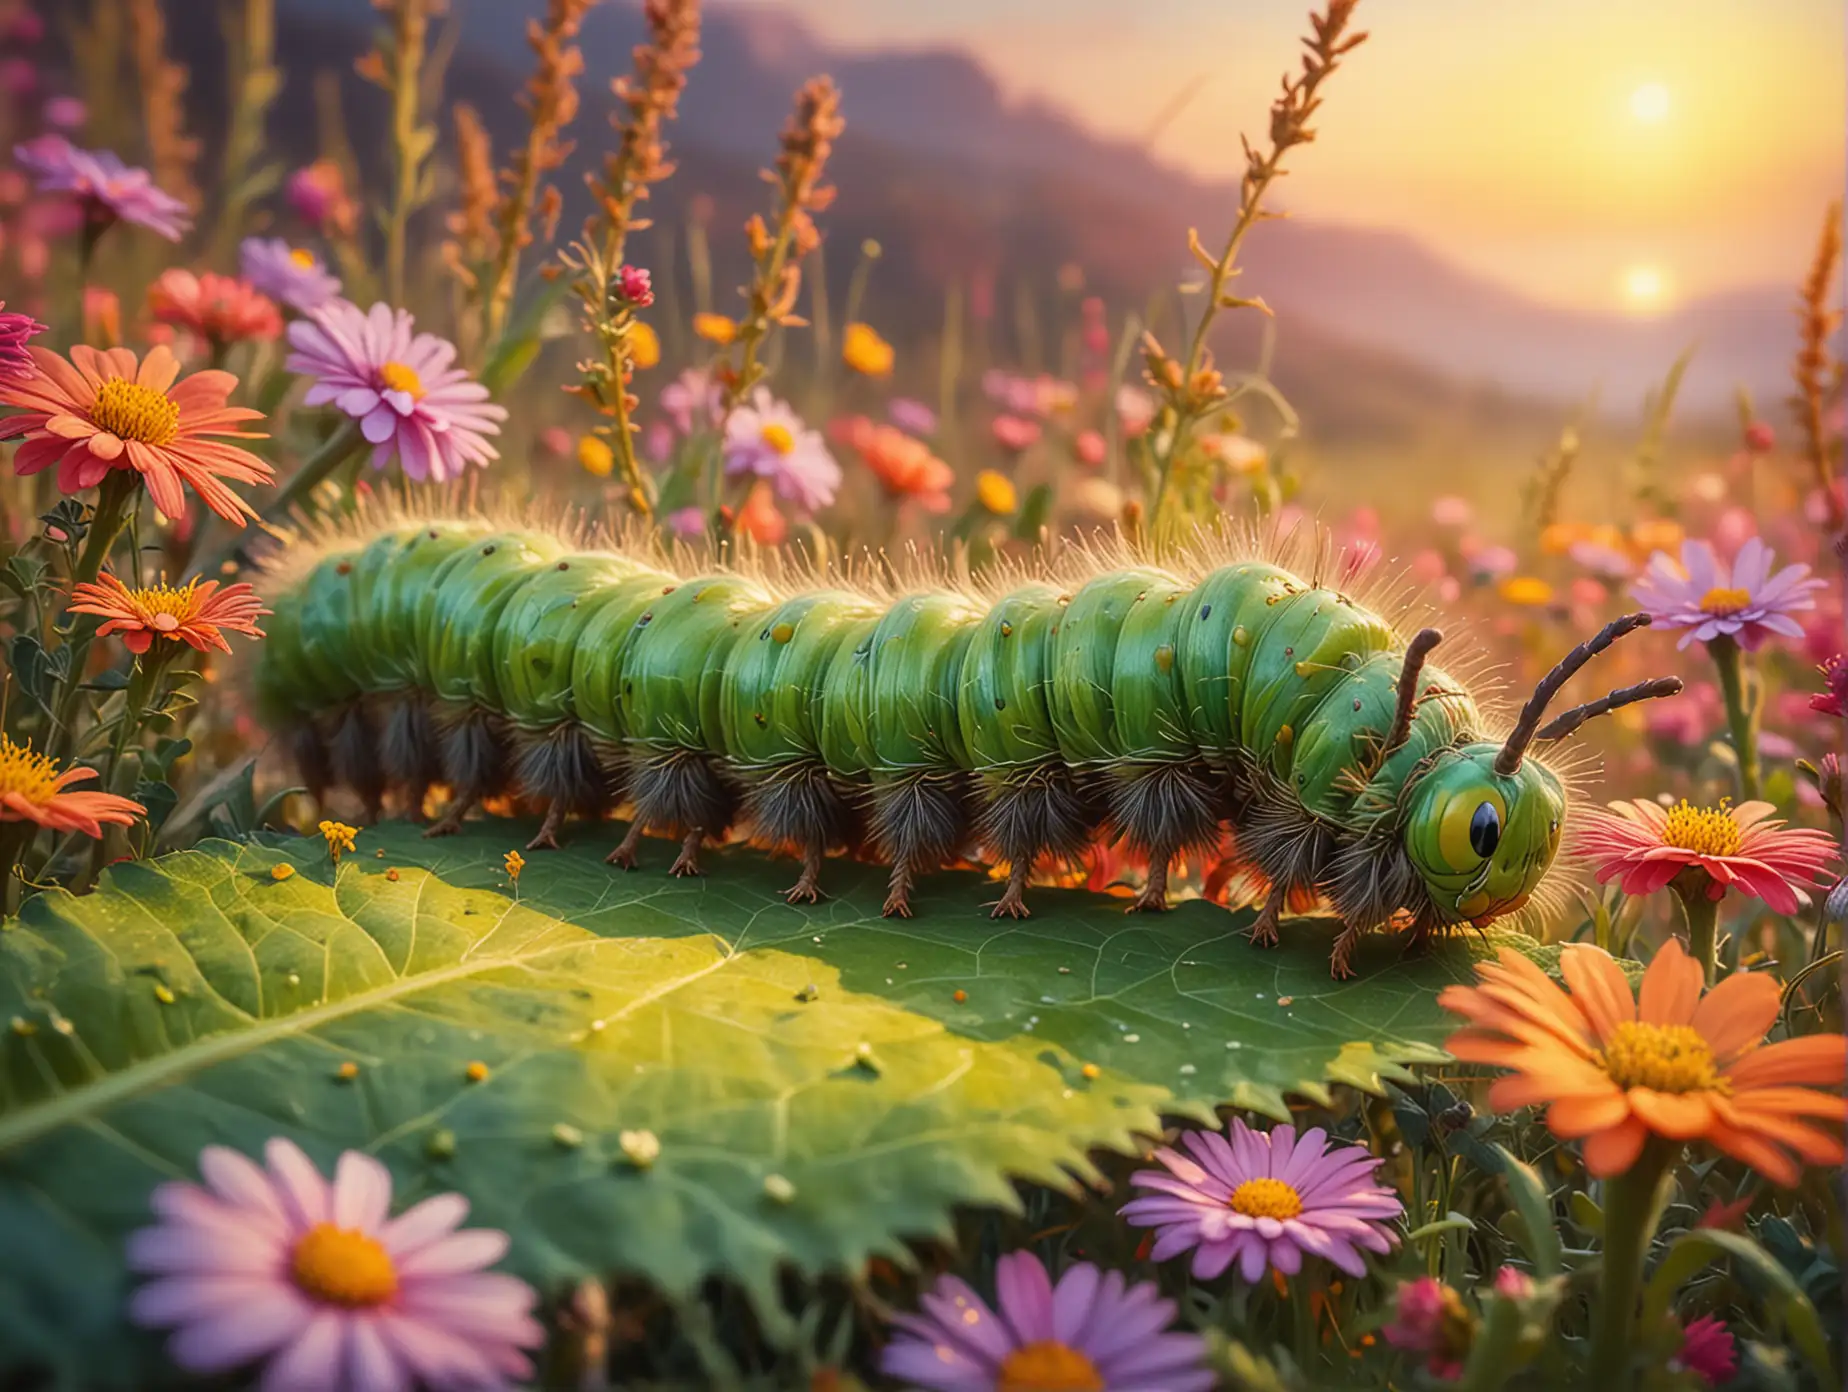 closeup of a green caterpillar crawling on a leaf in a colorful meadow of flowers at sunset. In style of impressionist oil painting.